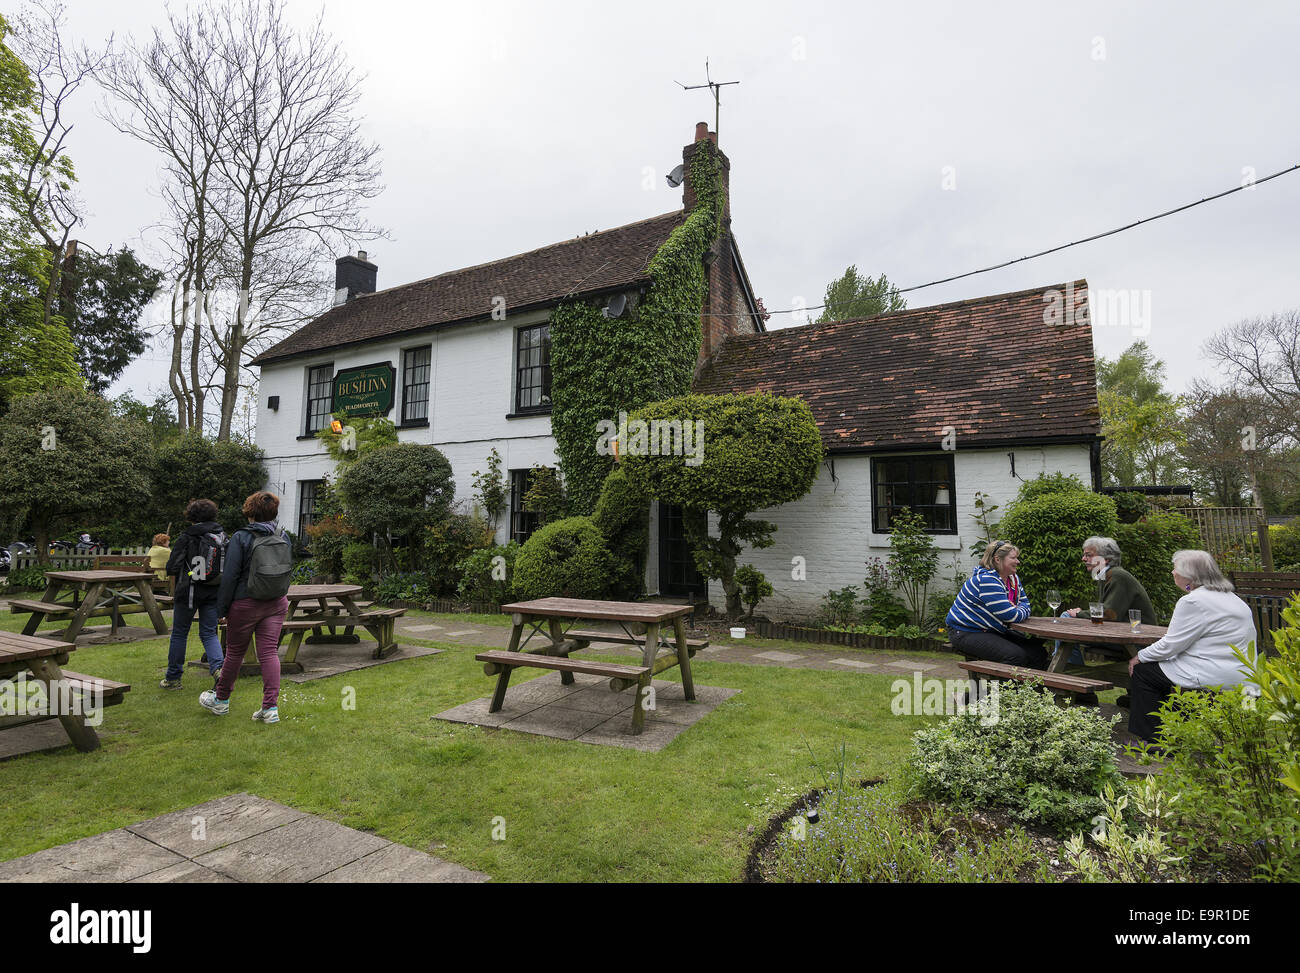 The Bush Inn pub situated on the banks of the River Itchen in the picturesque village of Ovington, Hampshire, England, UK Stock Photo